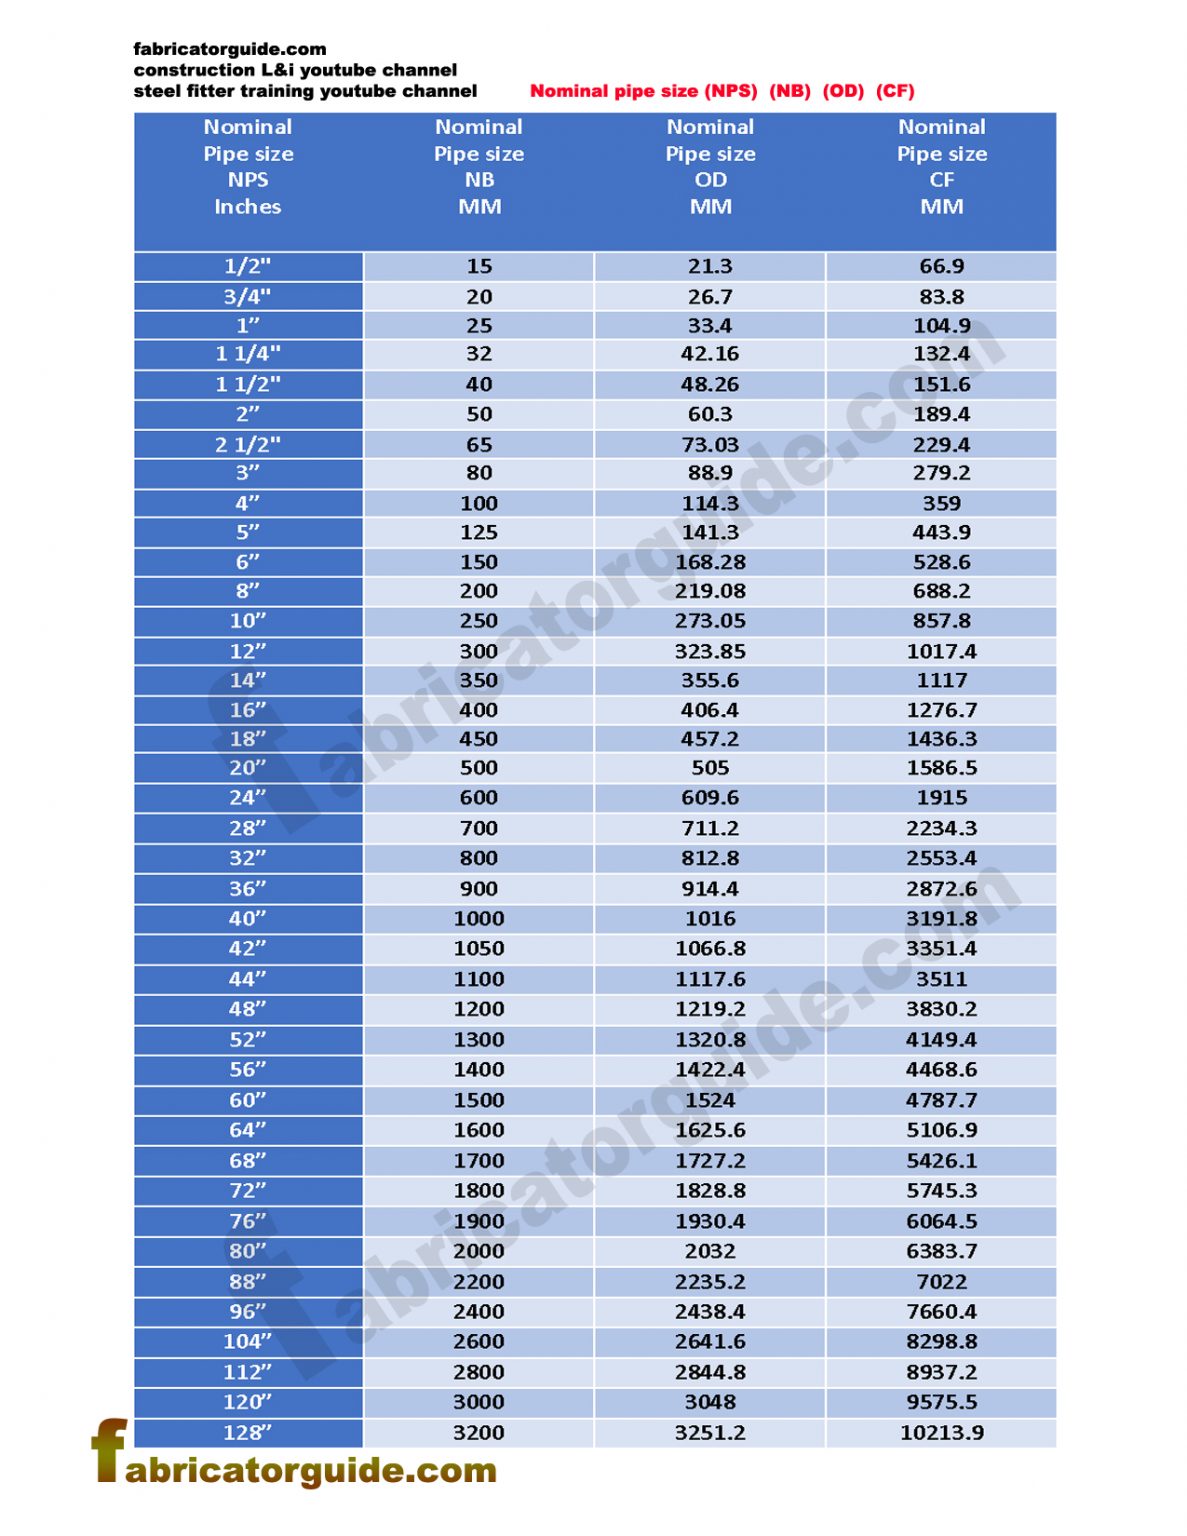 nominal-pipe-size-nps-nb-od-cf-pipe-dimensions-chart-nps-nb